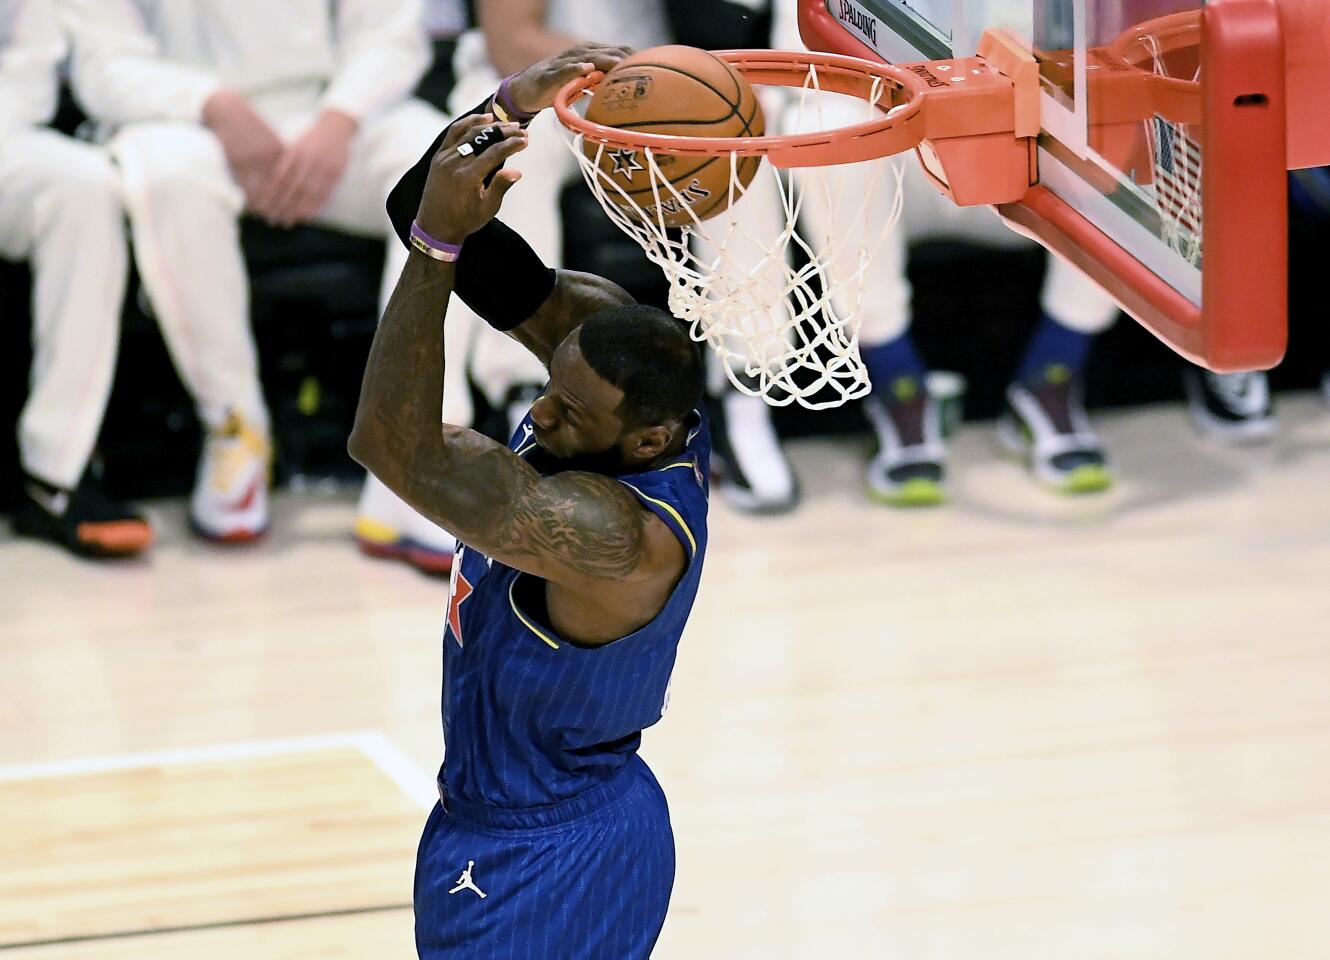 Lakers star LeBron James dunks the ball during the 69th NBA All-Star game at the United Center in Chicago on Feb. 16, 2020.